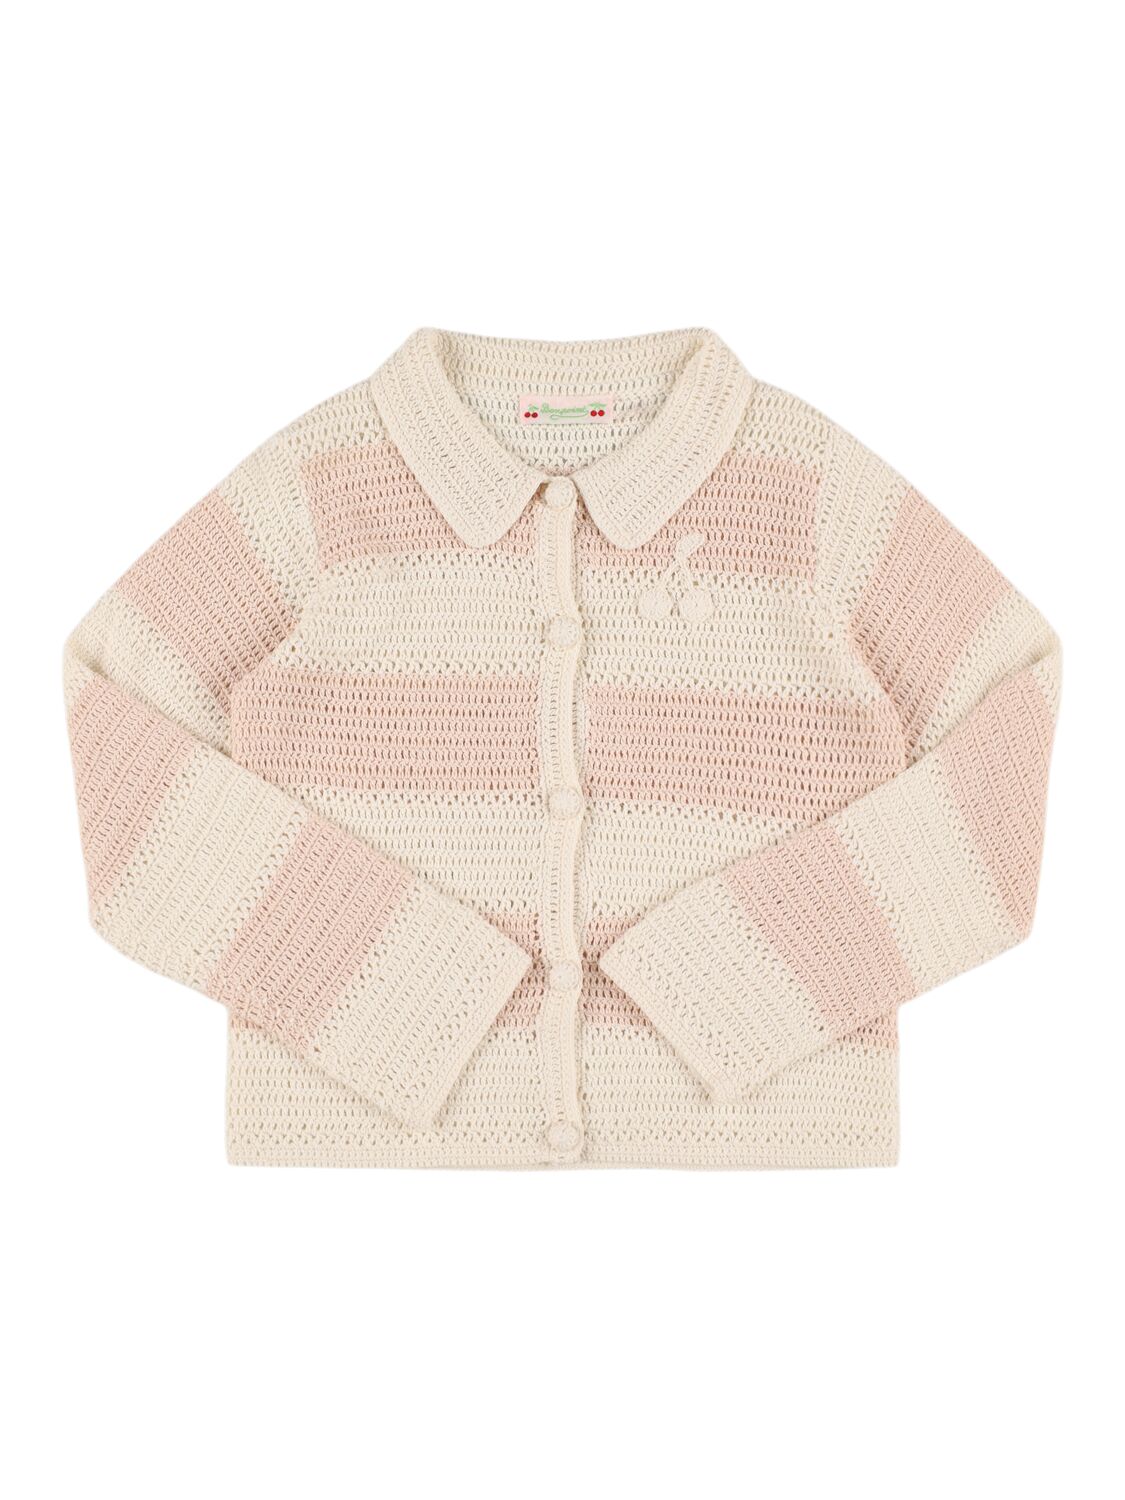 Image of Hand-crocheted Cotton Cardigan